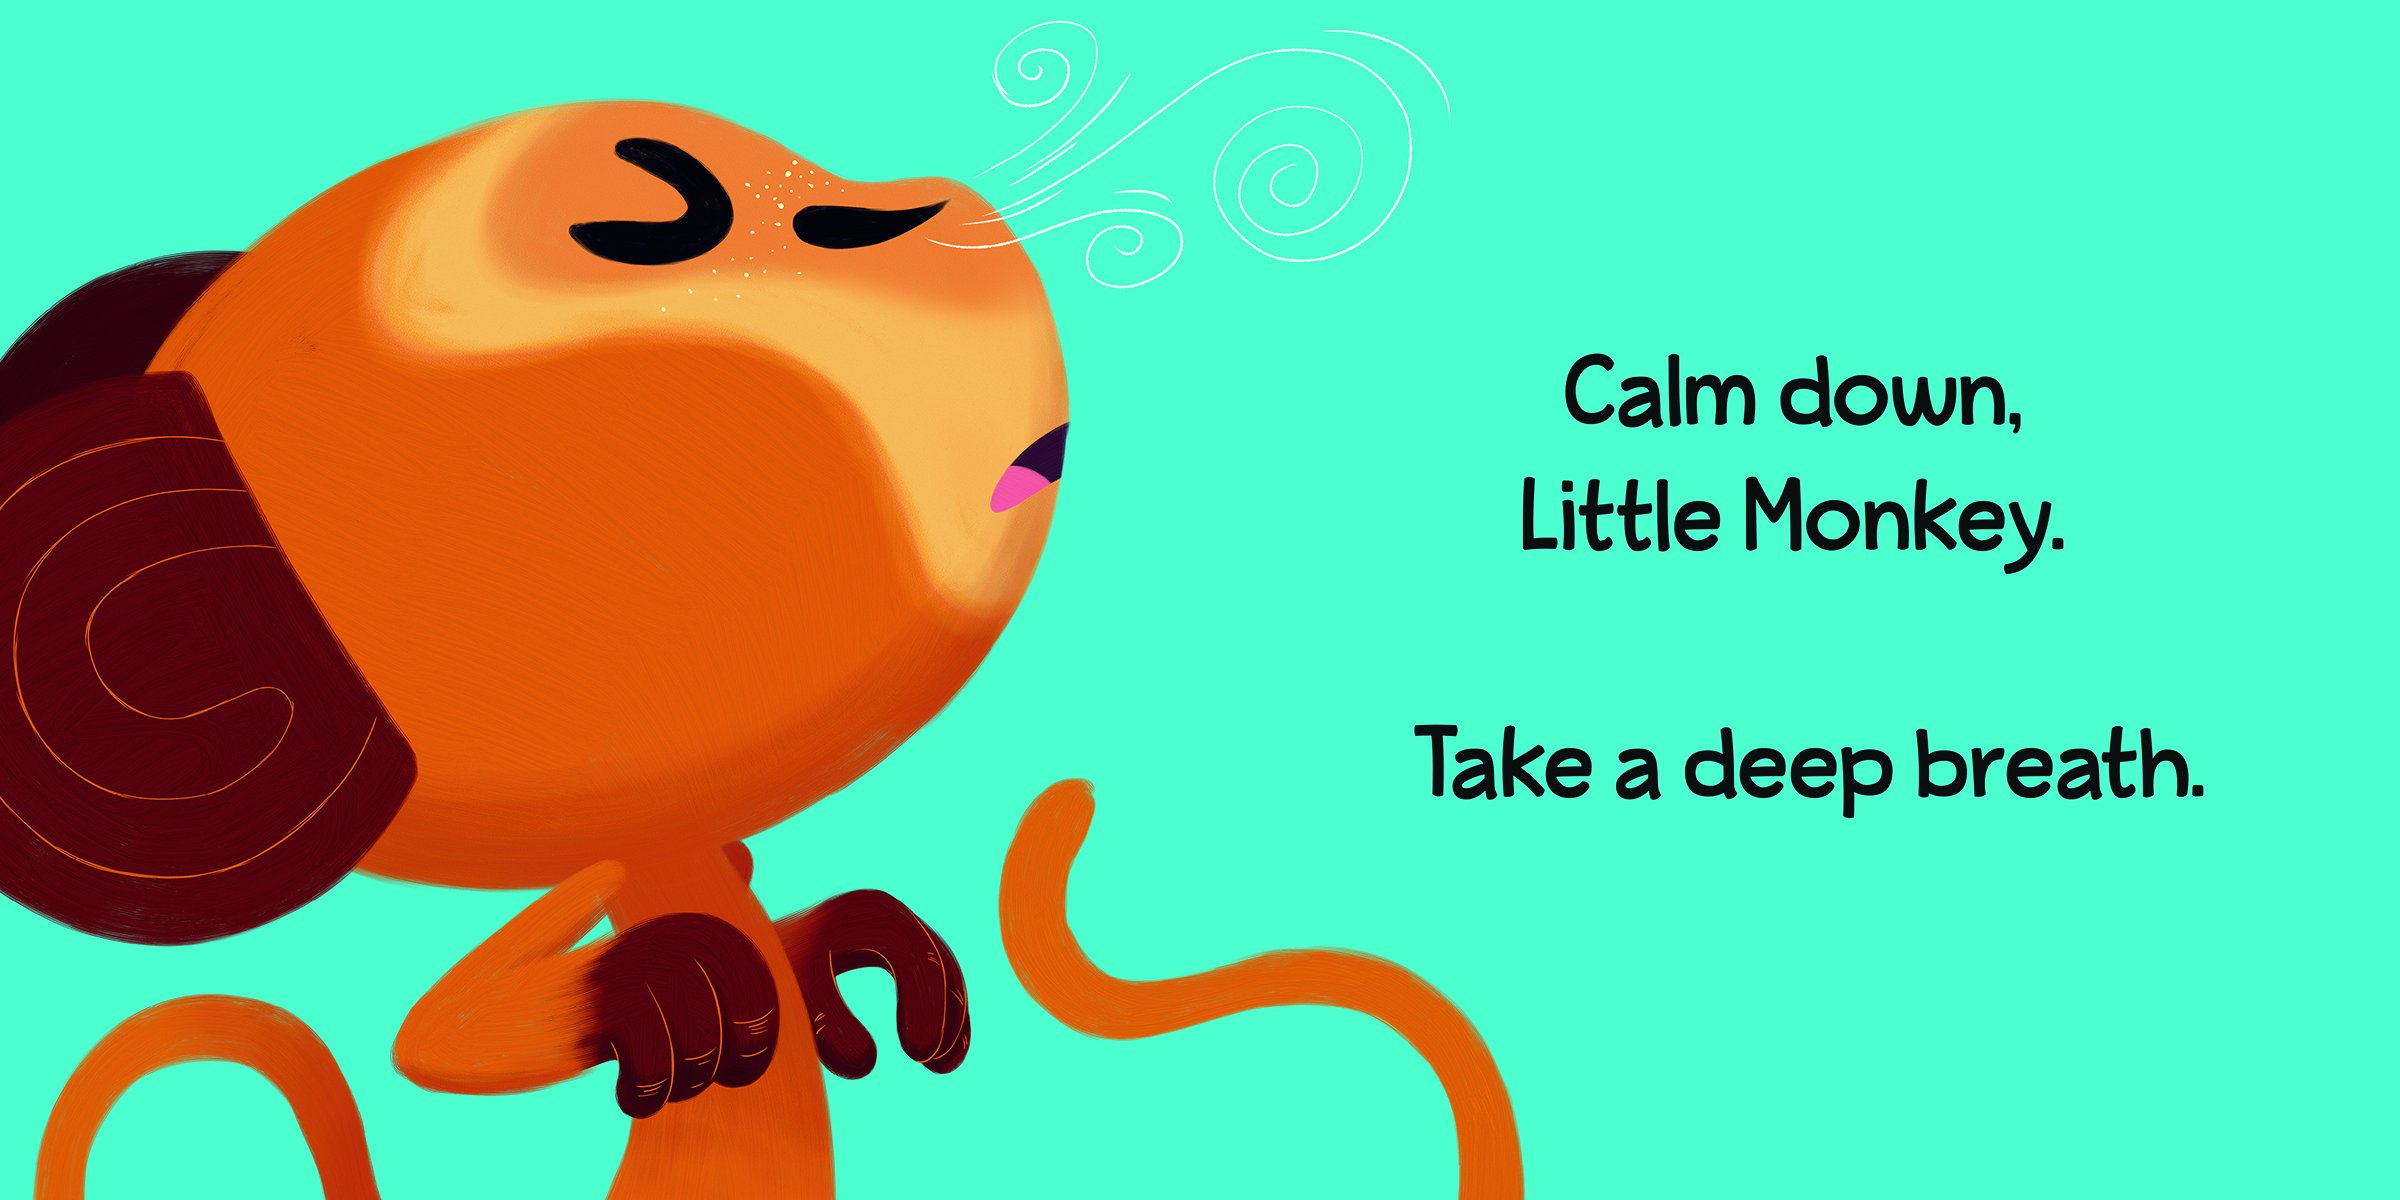 An illustrated monkey peacefully exhaling a breath with the words "Calm down little monkey, take a deep breath" written next to it